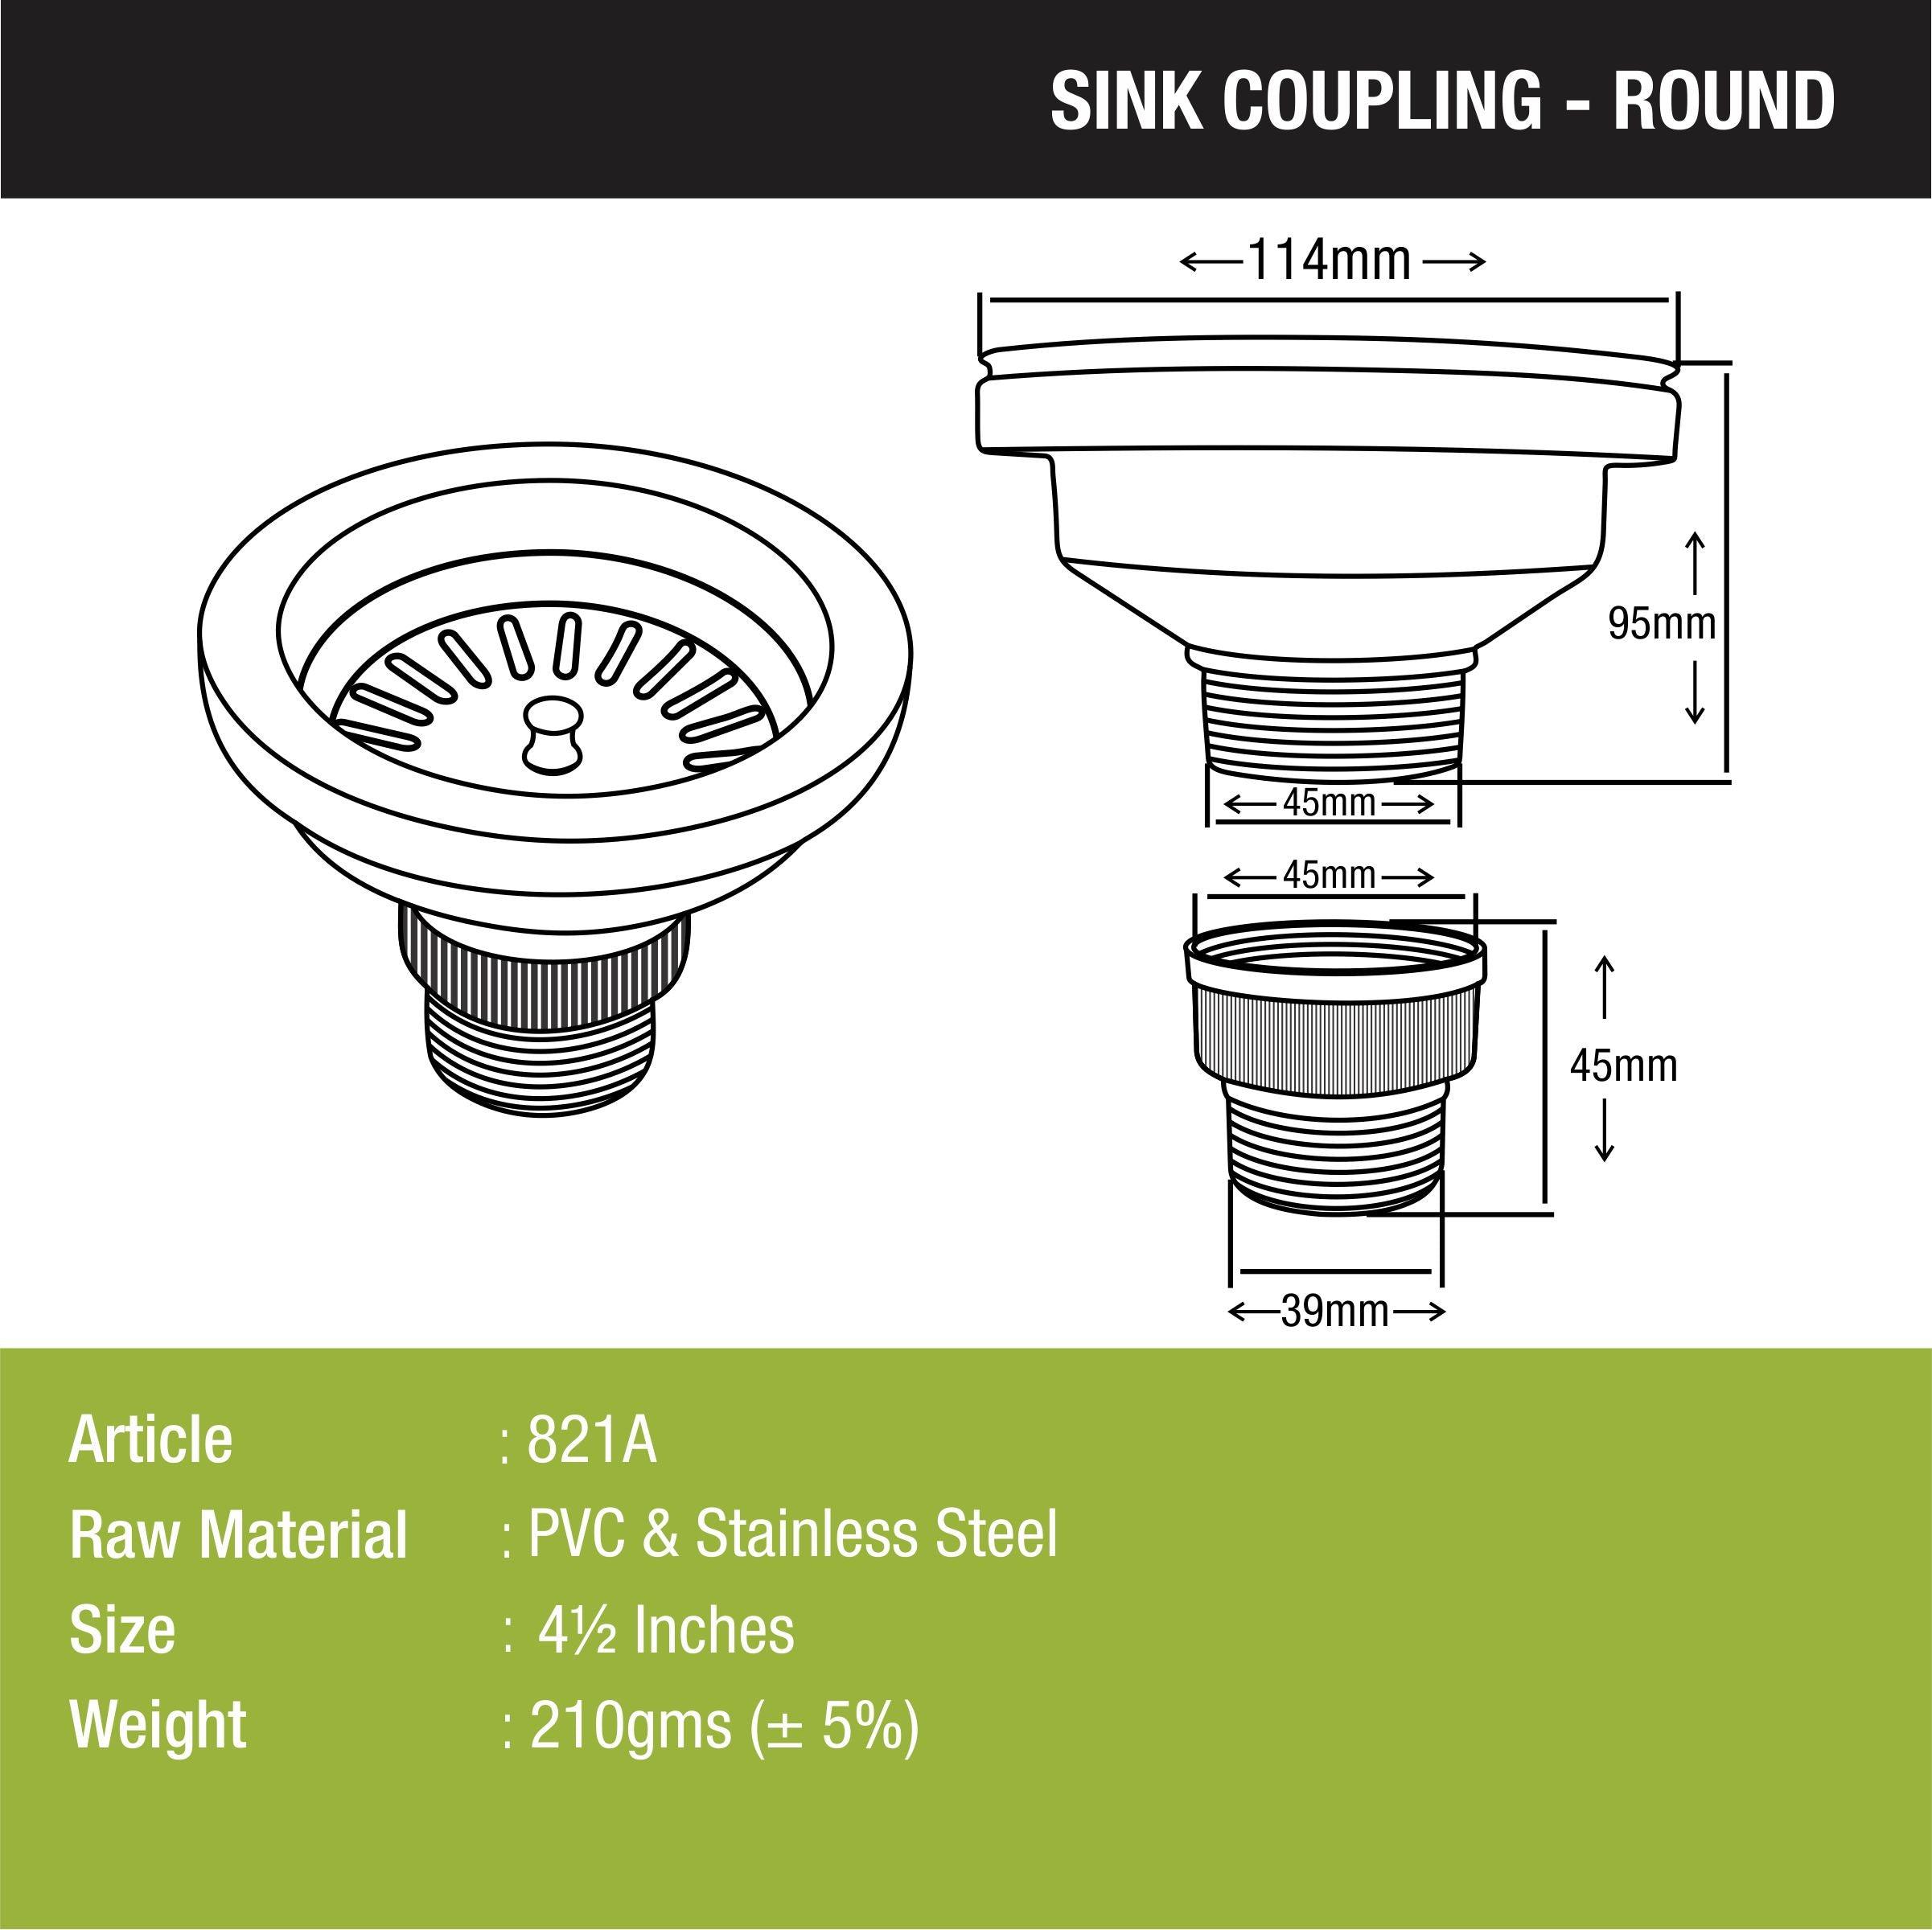 Round Kitchen Sink Coupling (4½ Inches) sizes and dimensions